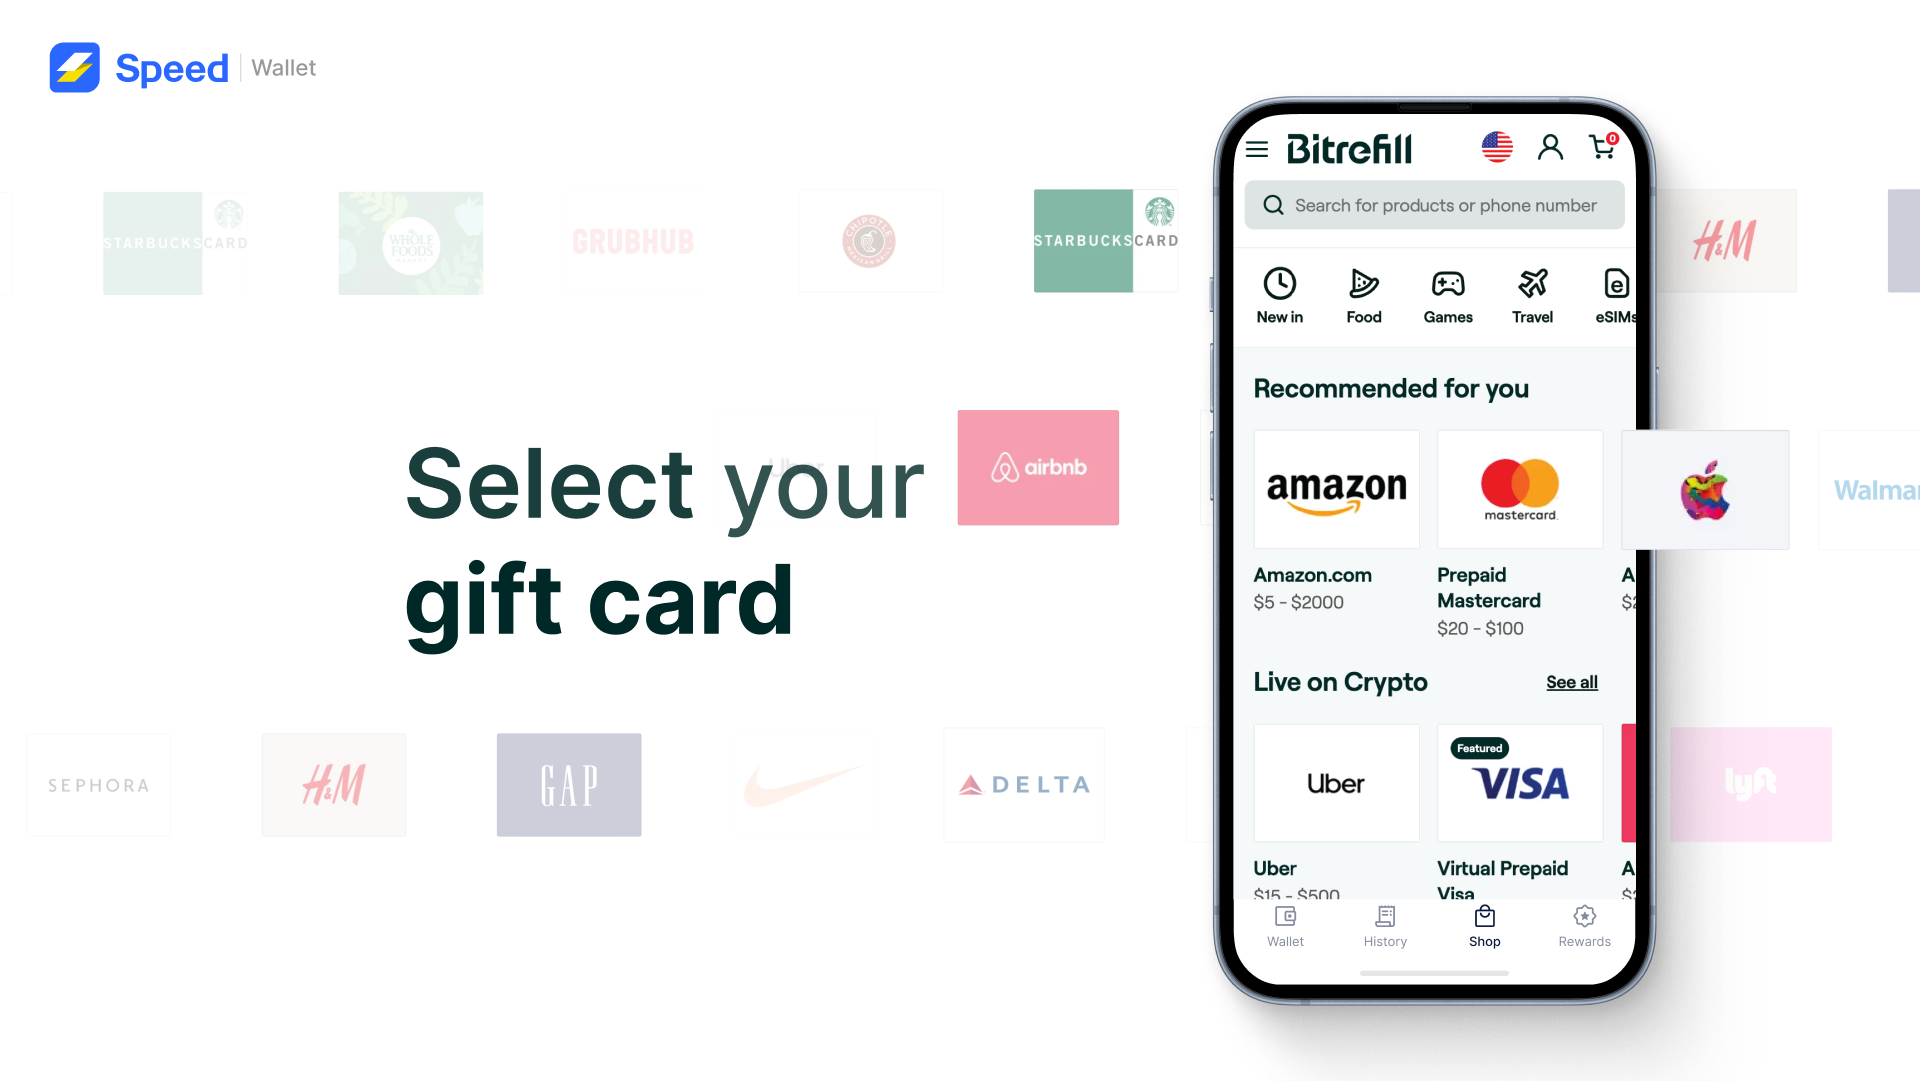 Select your gift card